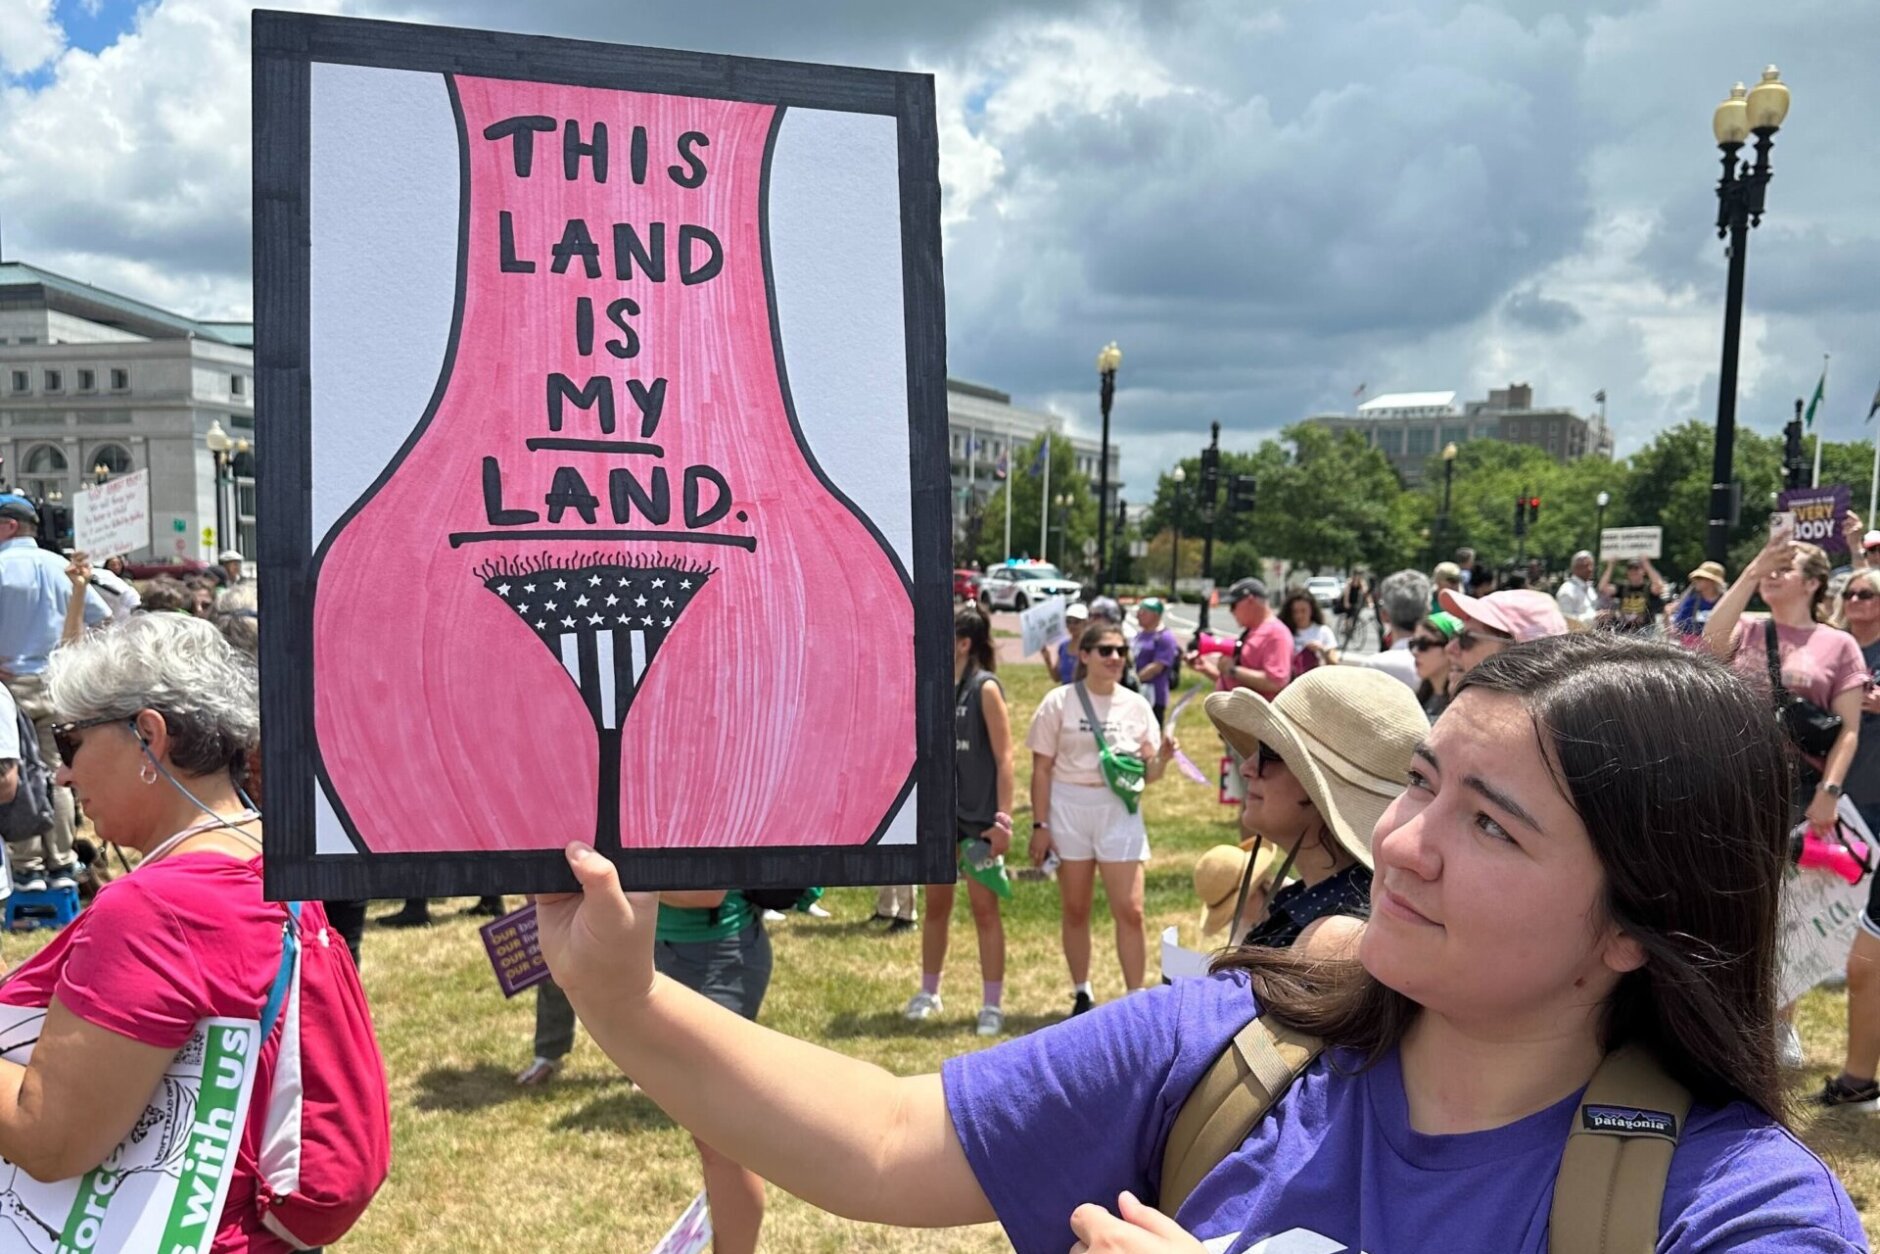 <p>Corey says she&#8217;ll keep coming to these marches as long as she can and wants people to know—the fight isn&#8217;t over.</p>
<p>“The poorest states in the country, with the poorest people, who this will affect the most, are the ones being hit with it the hardest,” she said.</p>
